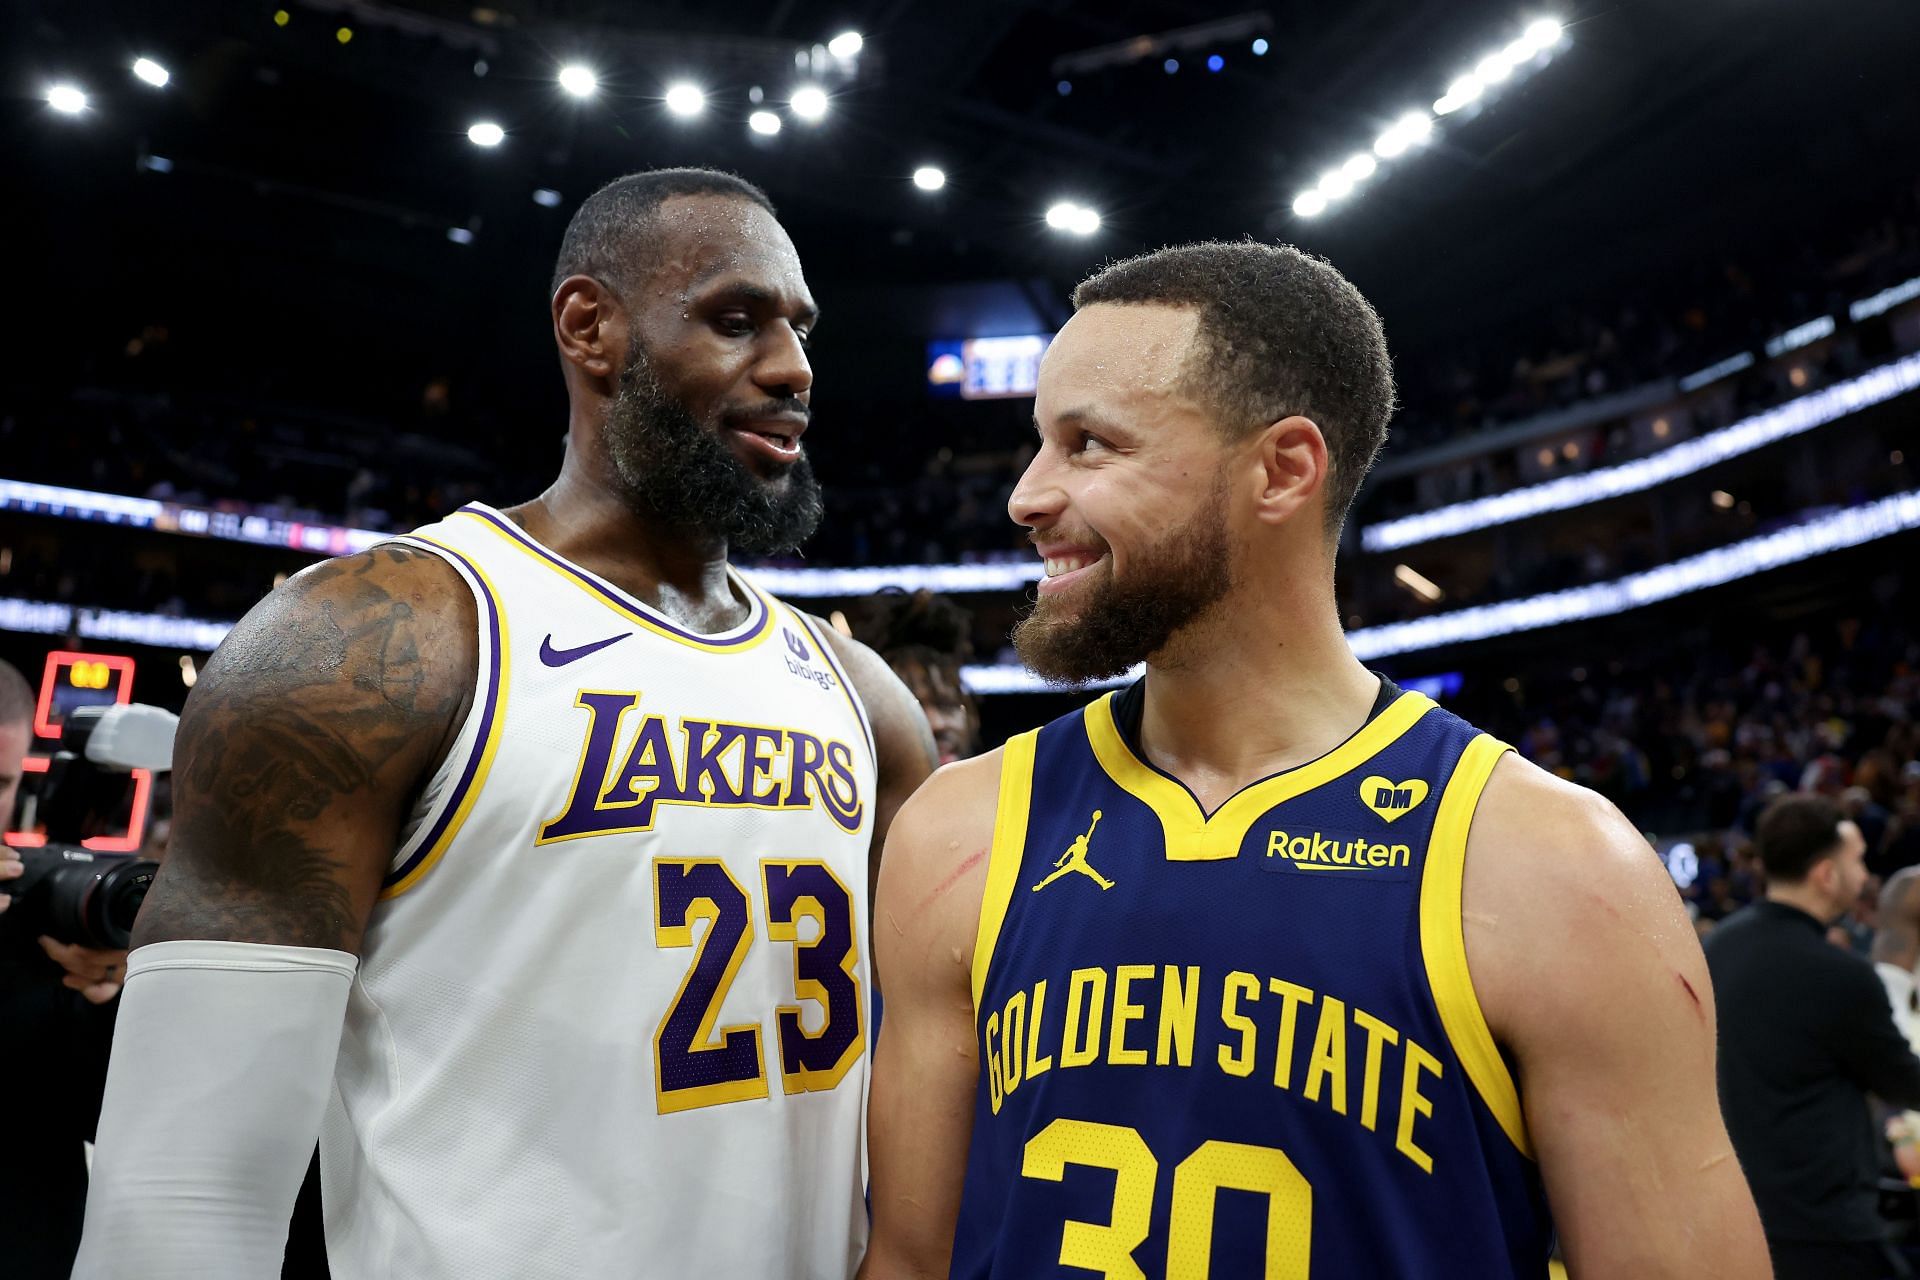 LeBron and Steph could finally team up